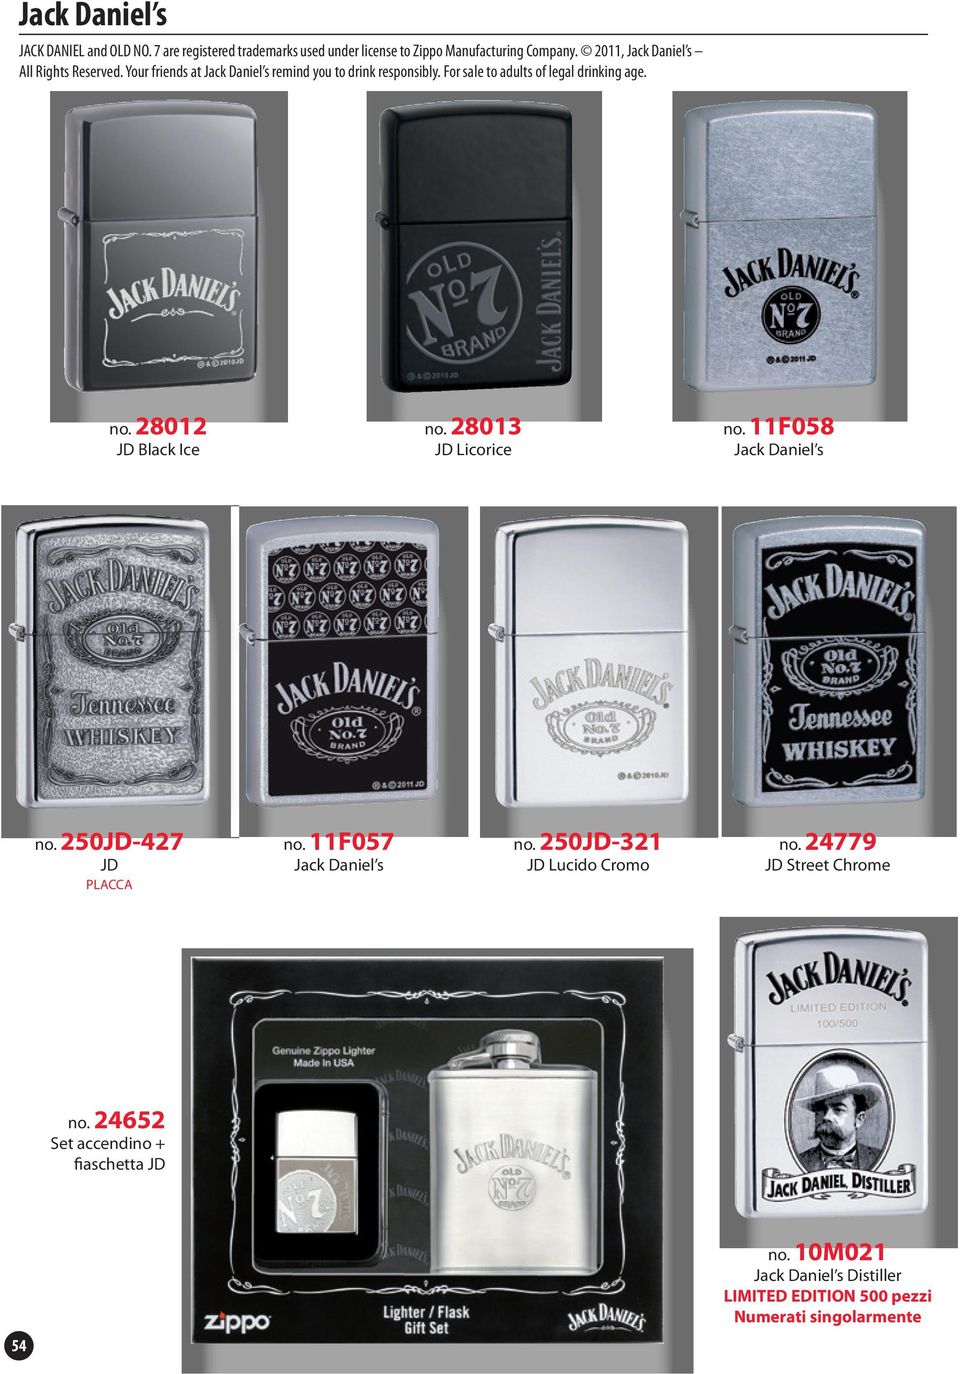 For sale to adults of legal drinking age. no. 28012 JD Black Ice no. 28013 JD Licorice no. 11F058 Jack Daniel s no. 250JD-427 JD PLACCA no.